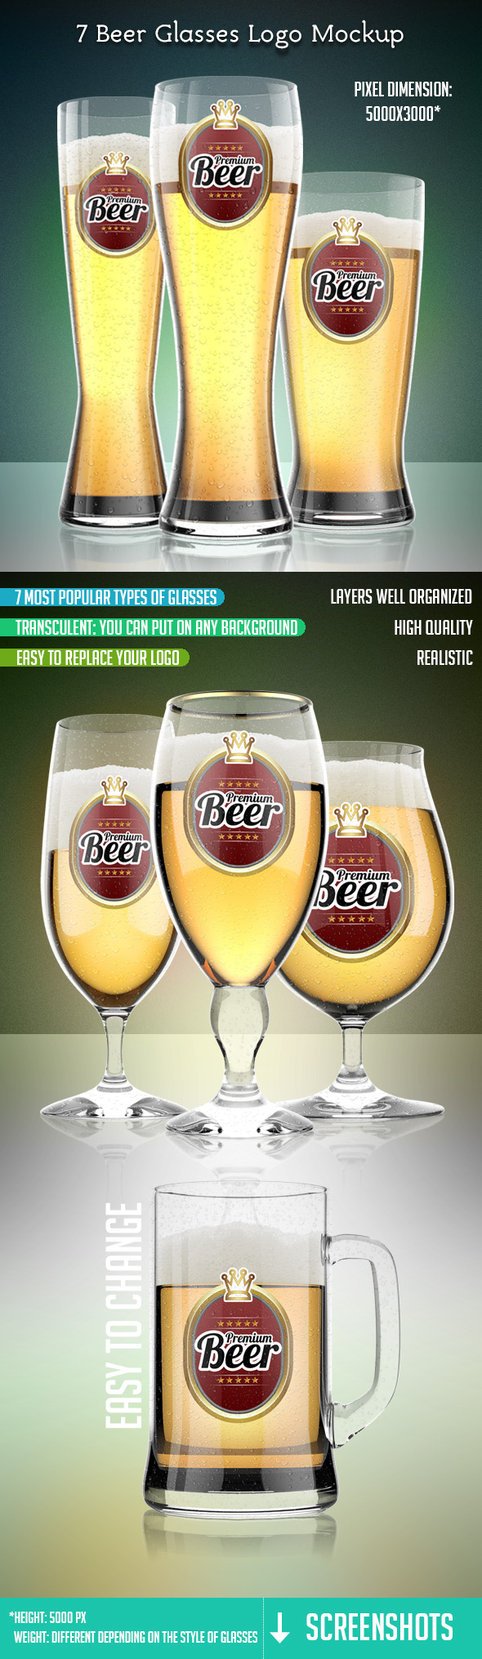 7 Beer Glass With Logo Mockup